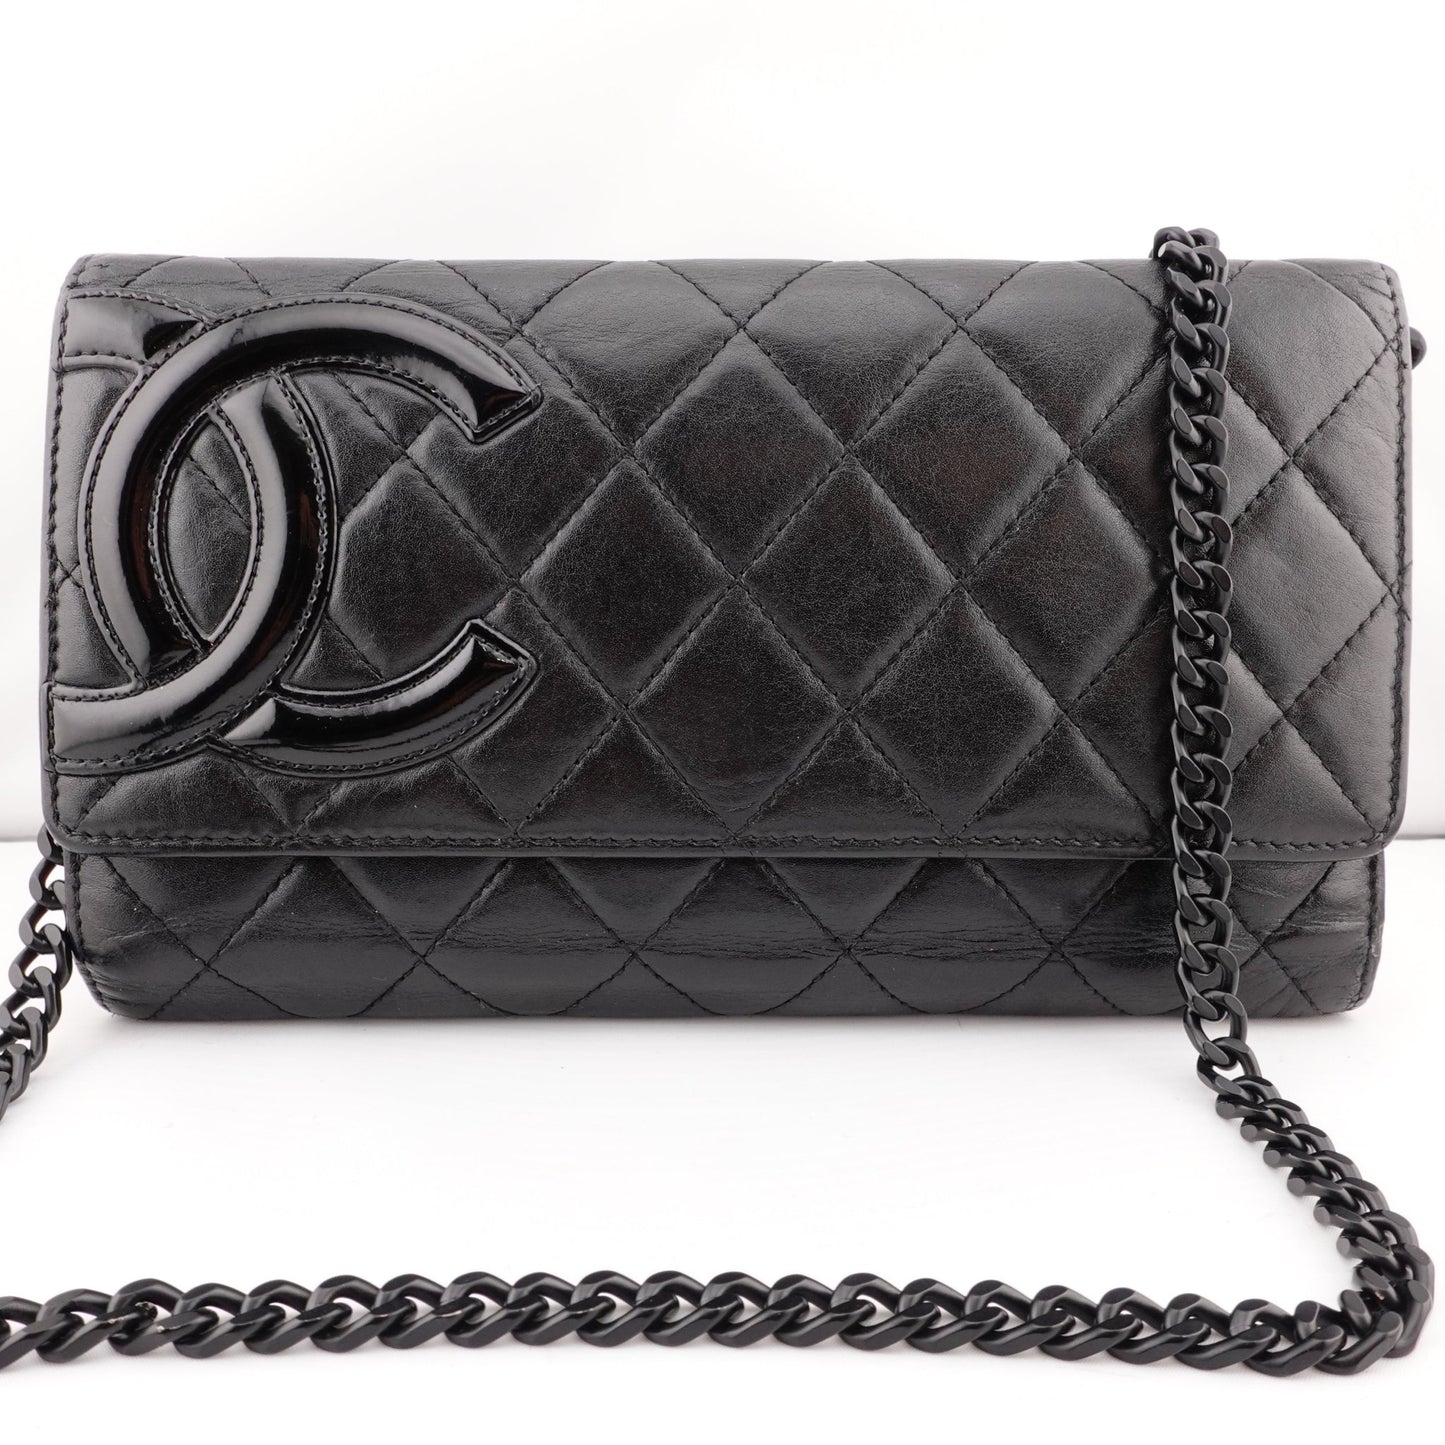 CHANEL Lambskin Cambon Trifold Wallet with Chain - Bag Envy